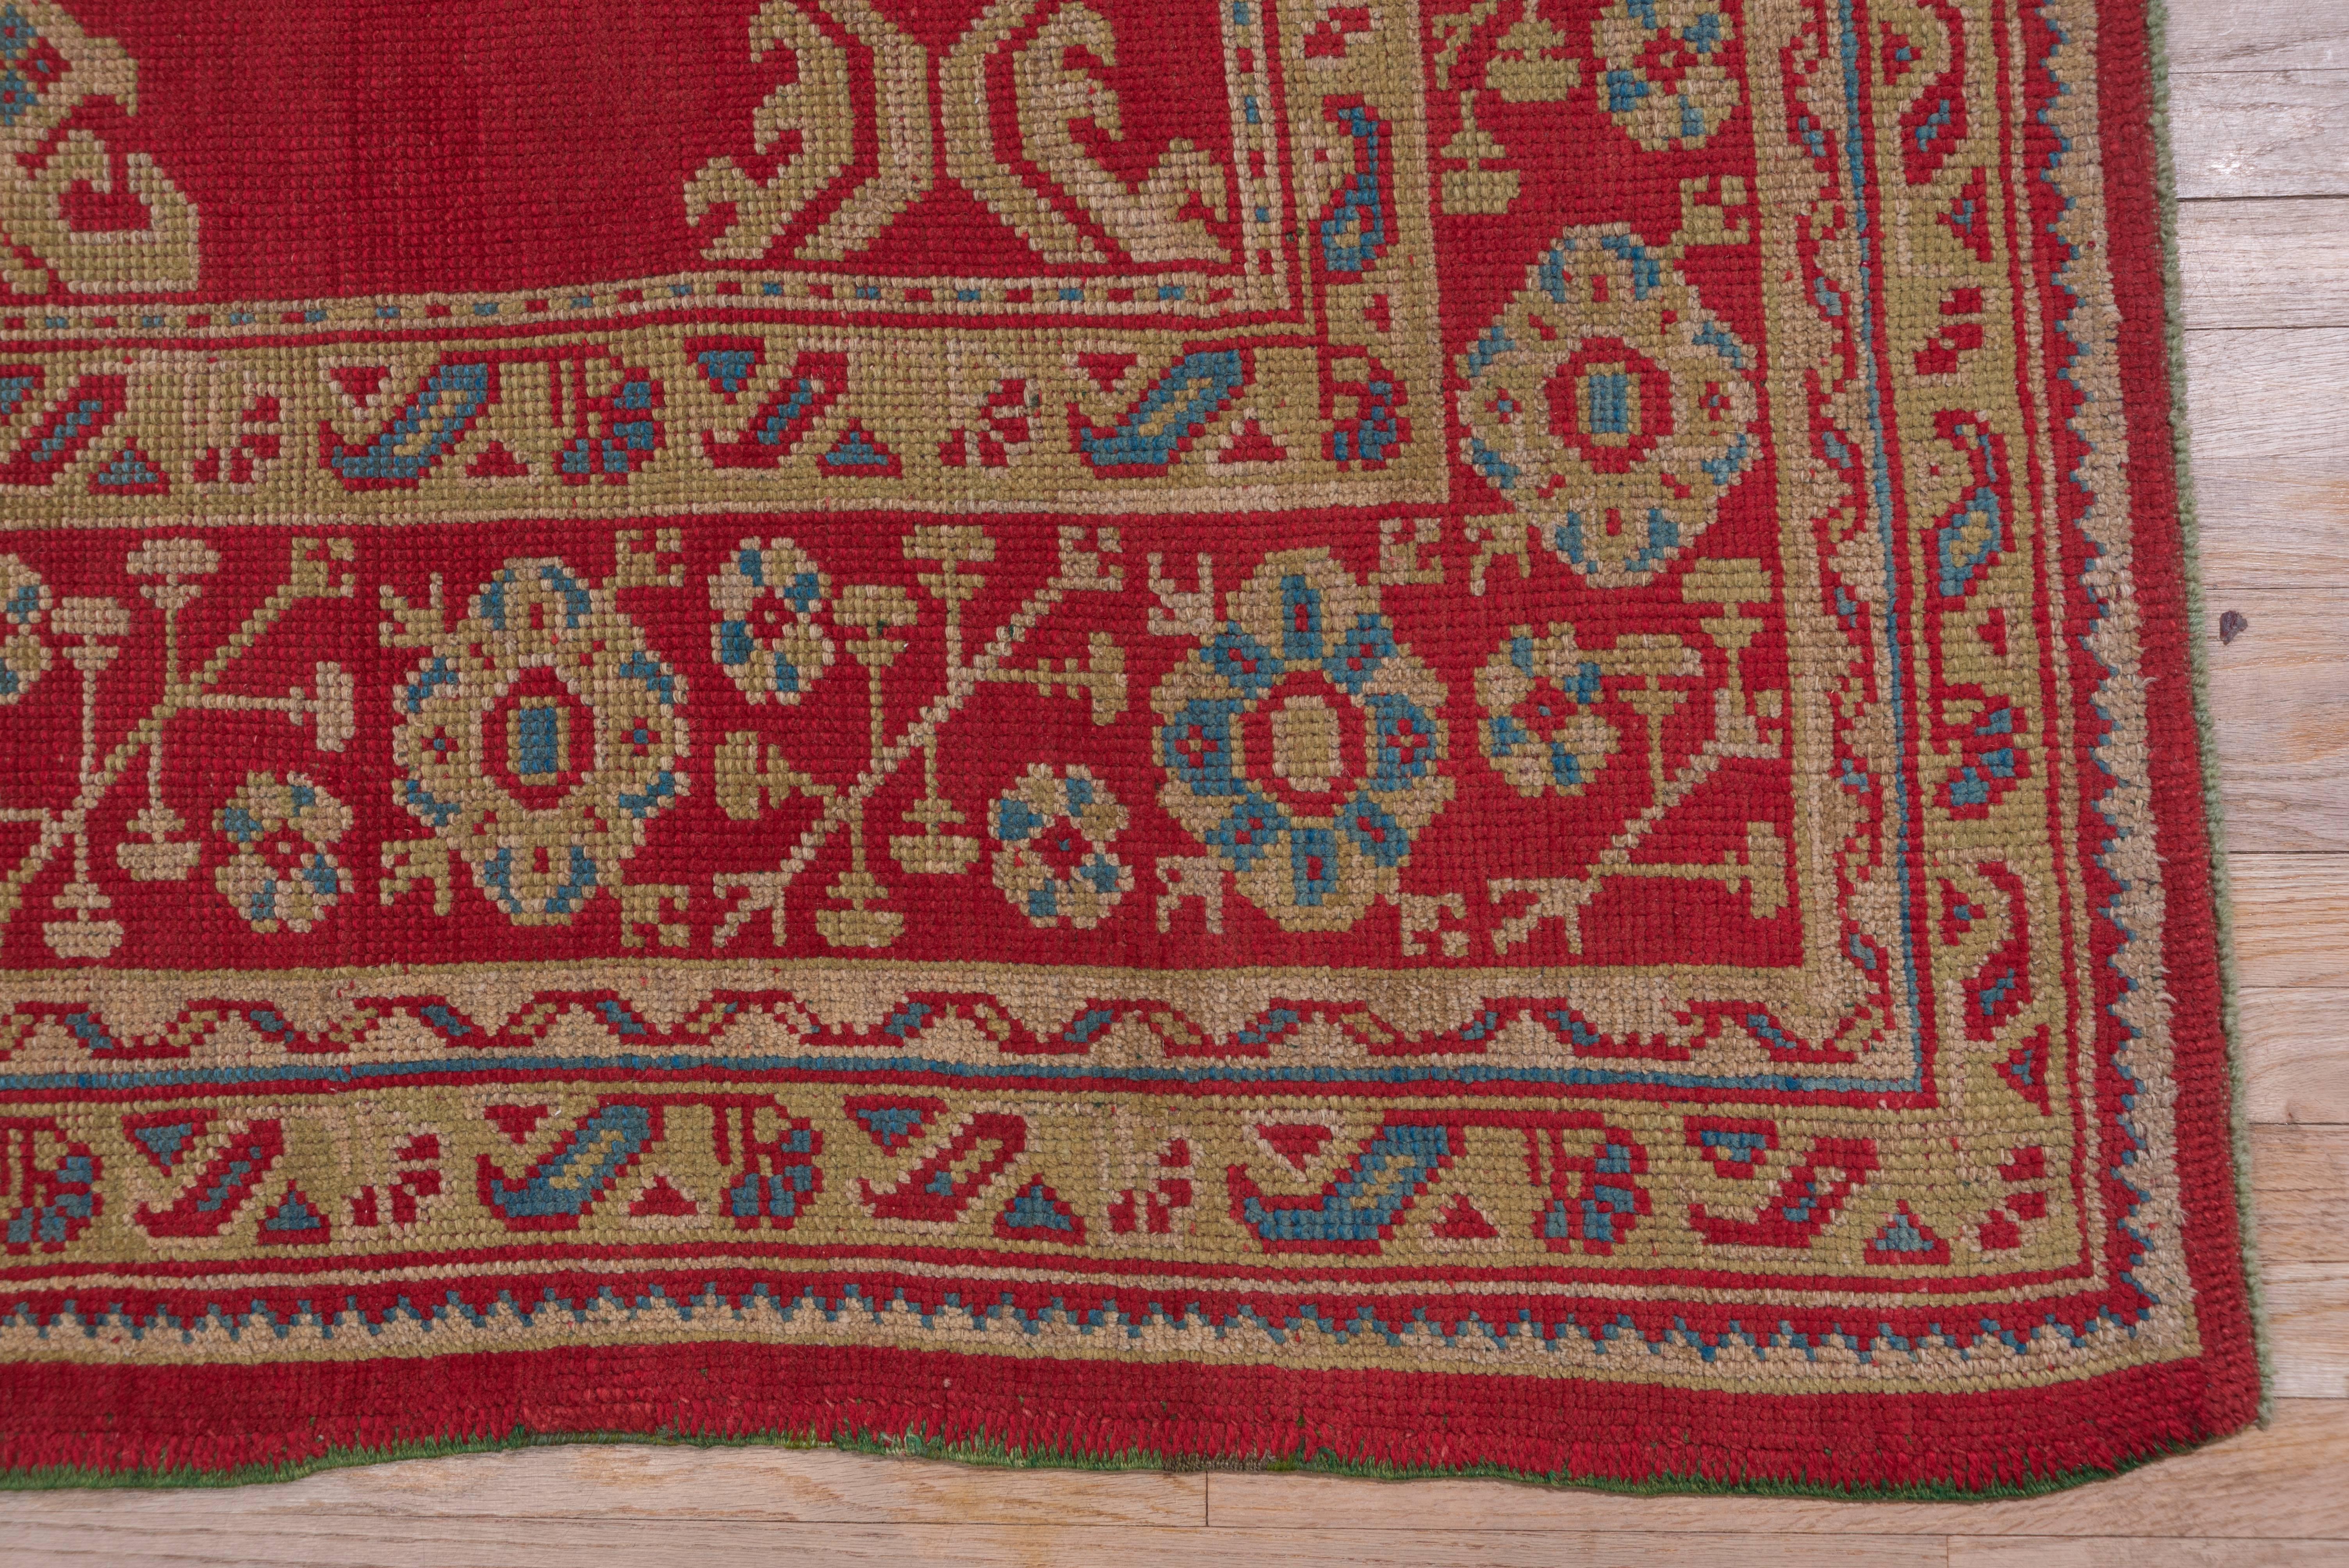 This 'Turkey Red' west Anatolian town carpet has a Yaprak and palmette pattern derived from 18th century archetypes. The red hyacinth and octagon rosette border also has earlier sources. Light yellow and green are among the detail tones.